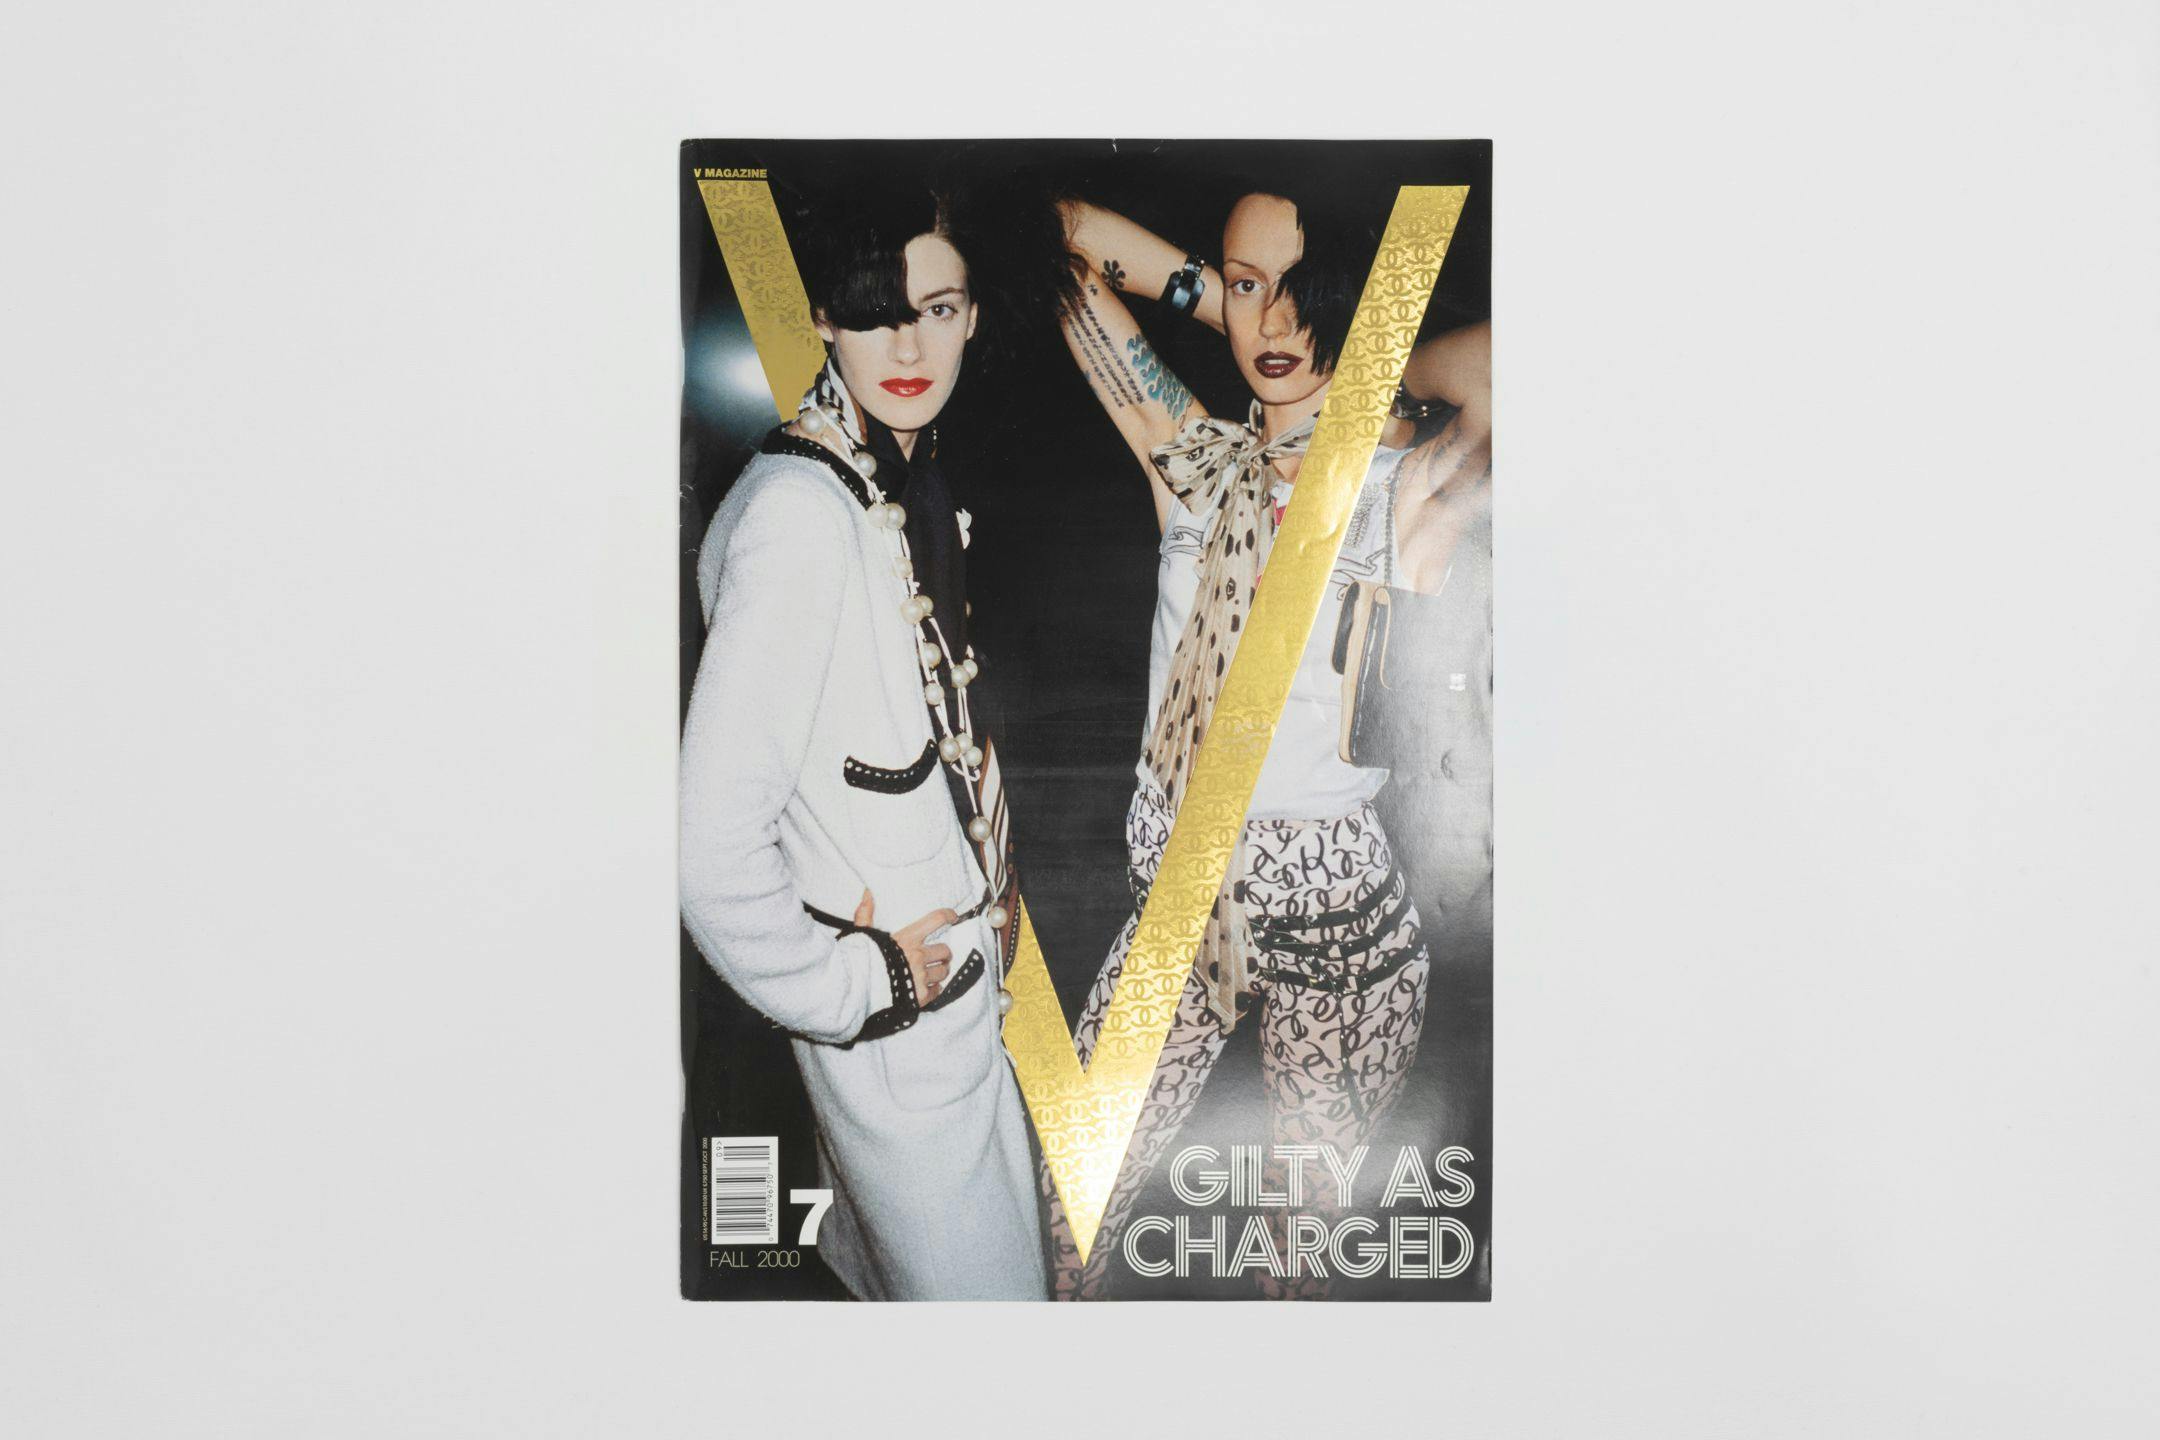 V Magazine Issue 7, "Gilty As Charged"